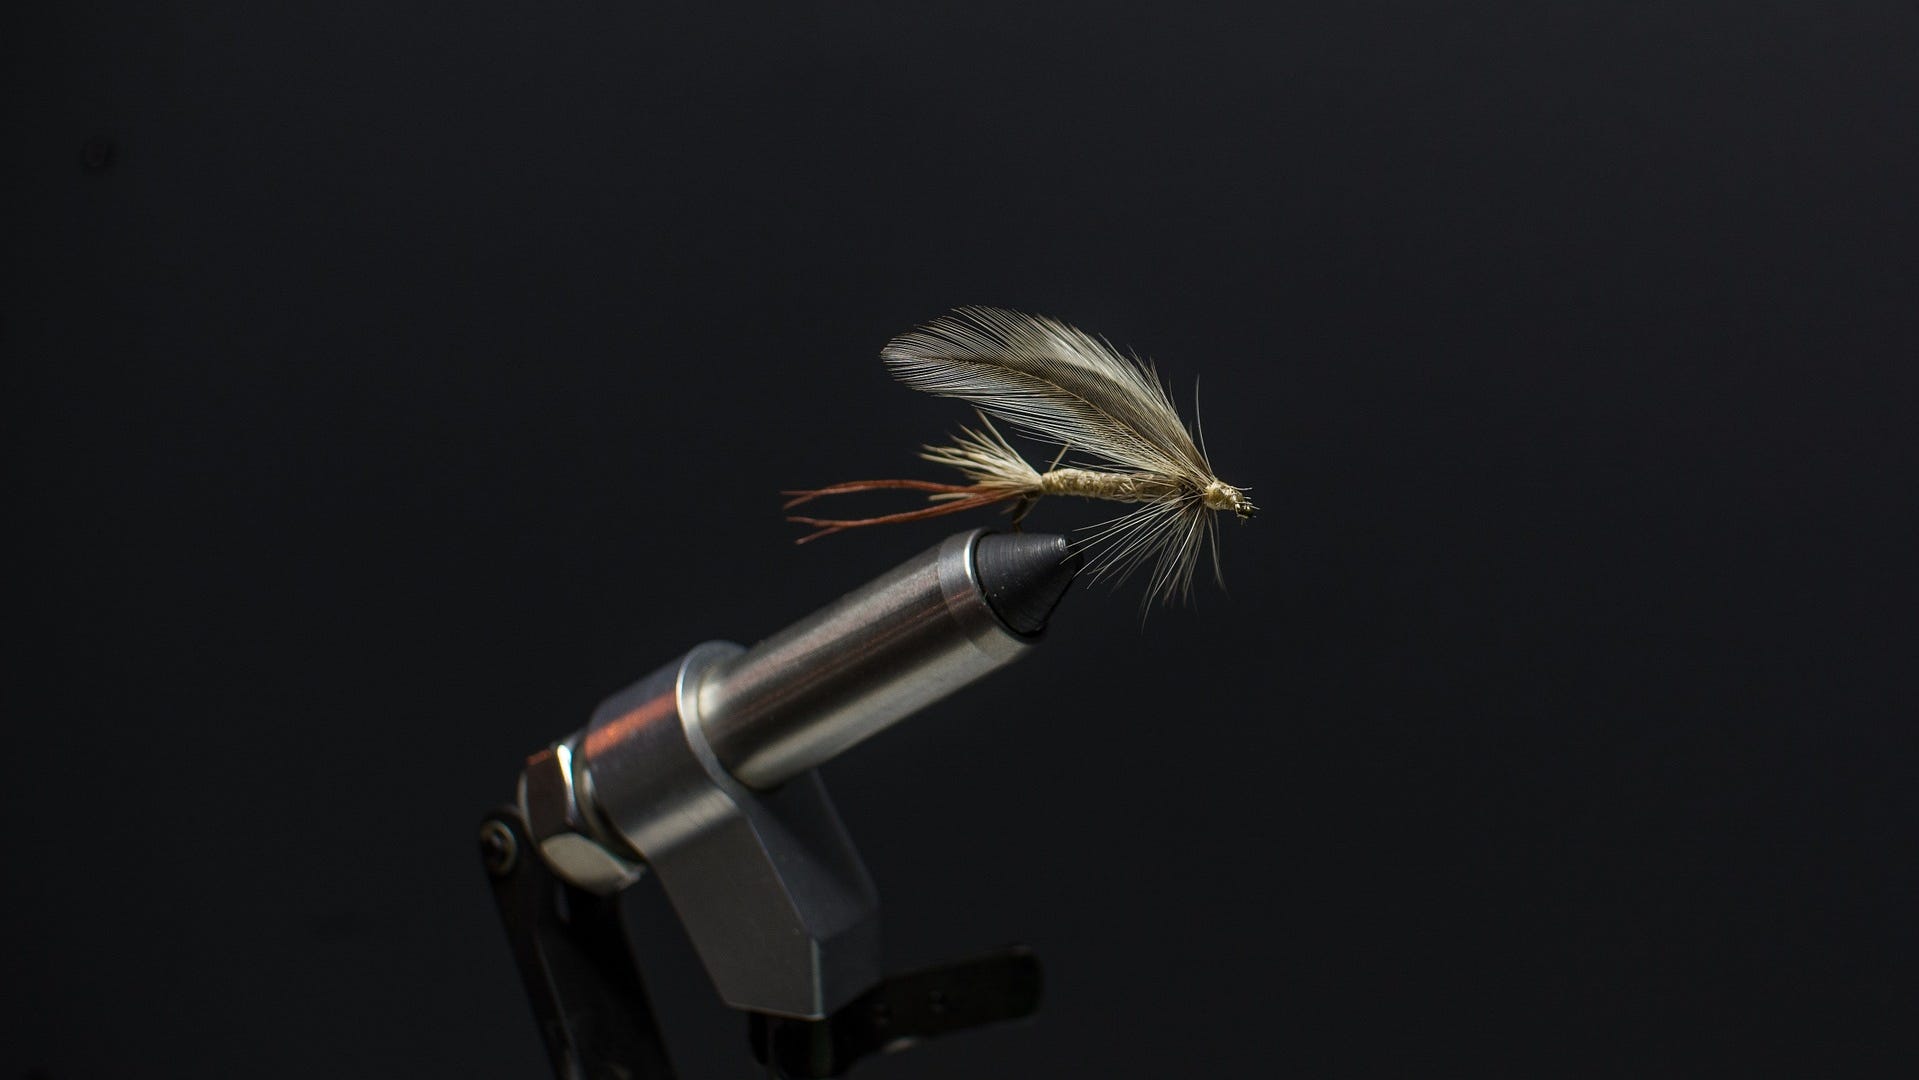 Fulkerson Winery, in partnership with the Glenora School of Fly Fishing, will be offering a 3-part fly tying series, and two seminars on Tactics for Spring Trout Fishing in February, March and April.